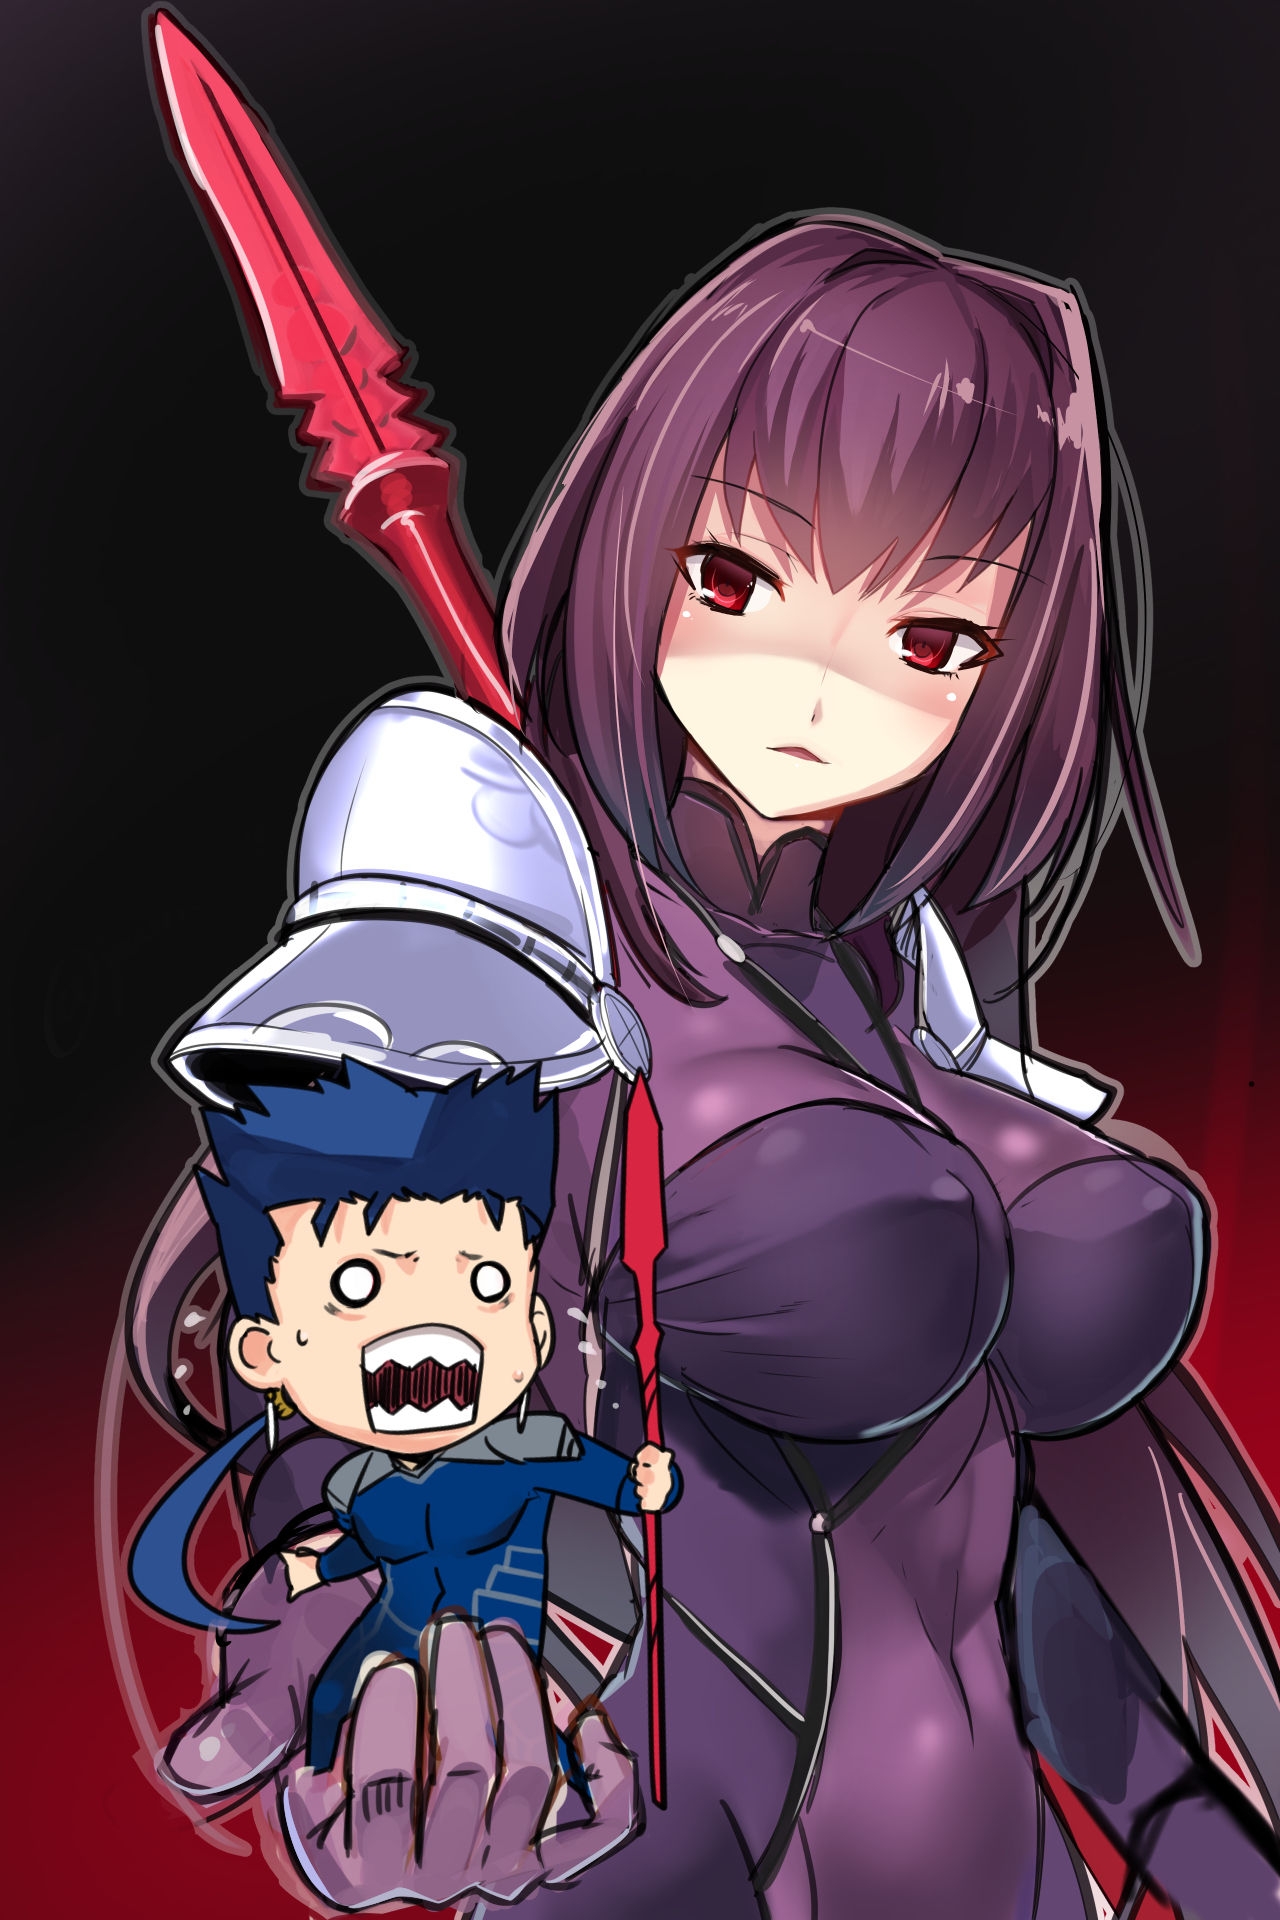 Scathach Fate/Grand Order 32